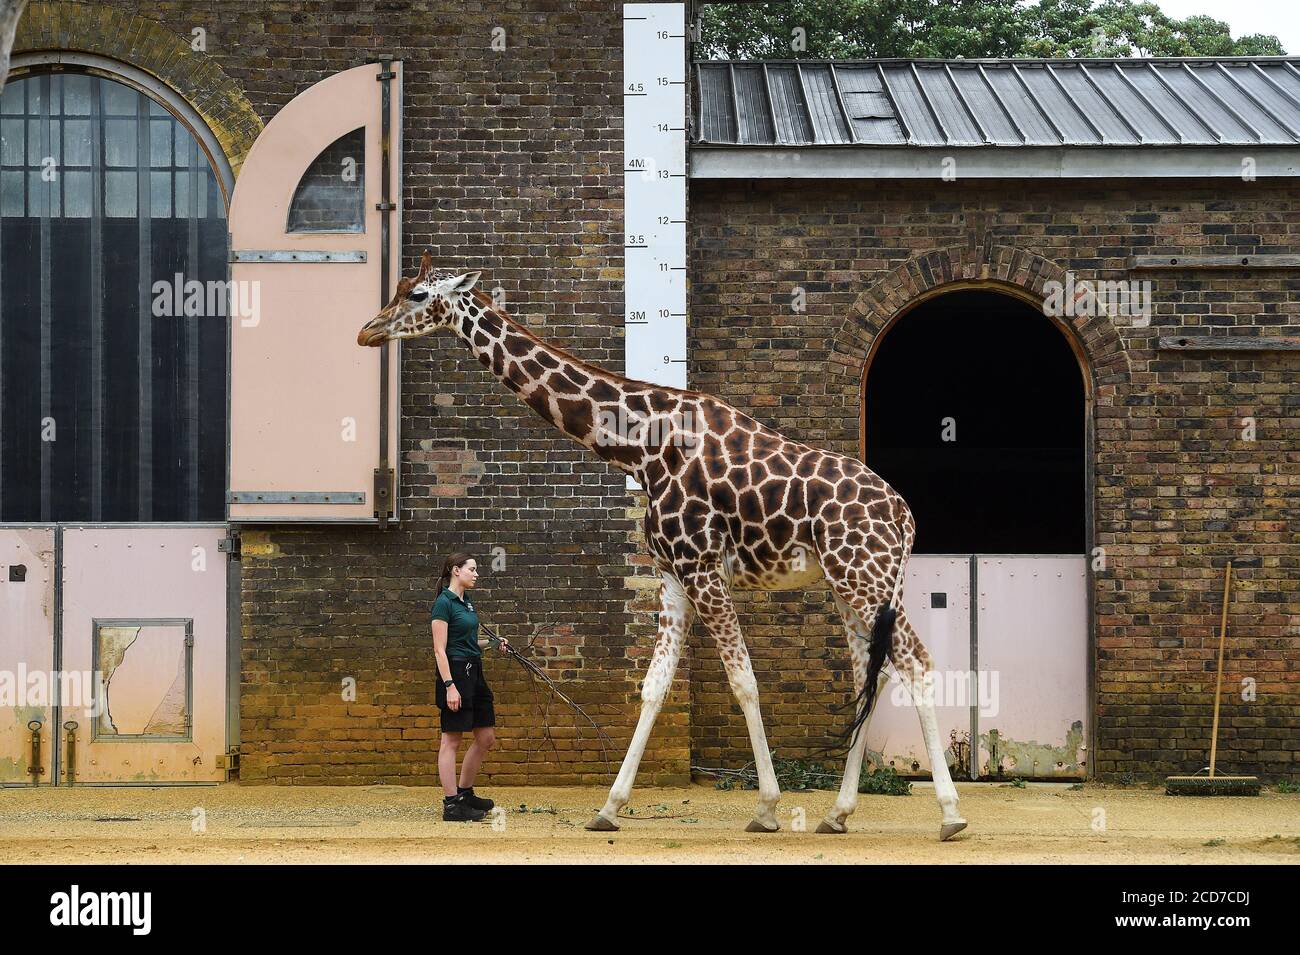 Keeper Maggie measures a giraffe during the annual weigh-in at ZSL London Zoo, London. Stock Photo